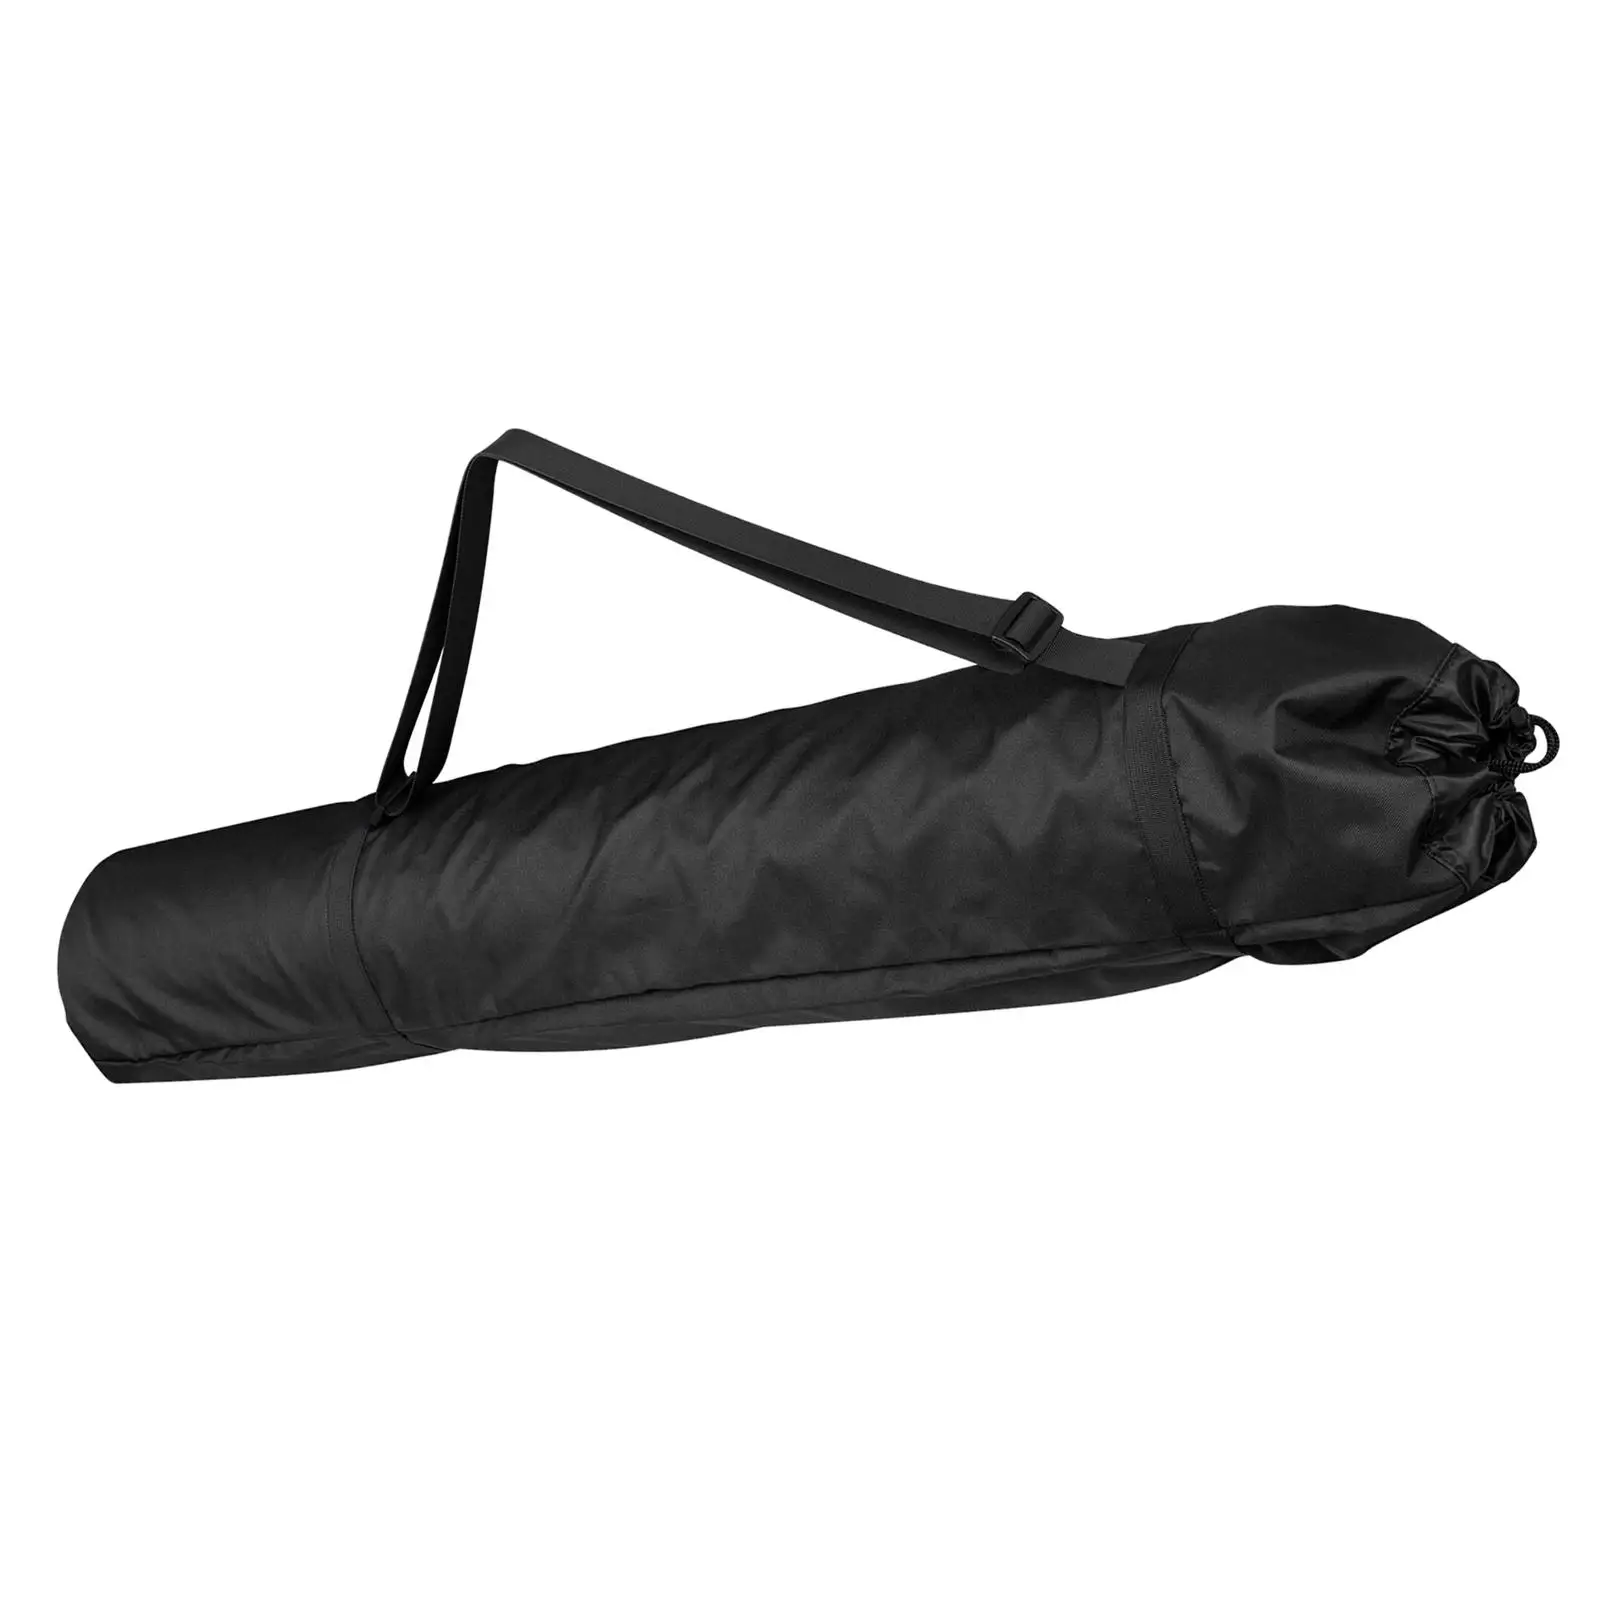 Portable Replacement Bag Folding Chair Handles Wide Drawstring Opening Outdoor Fishing Hiking Carry Bag for Backpacking Festival